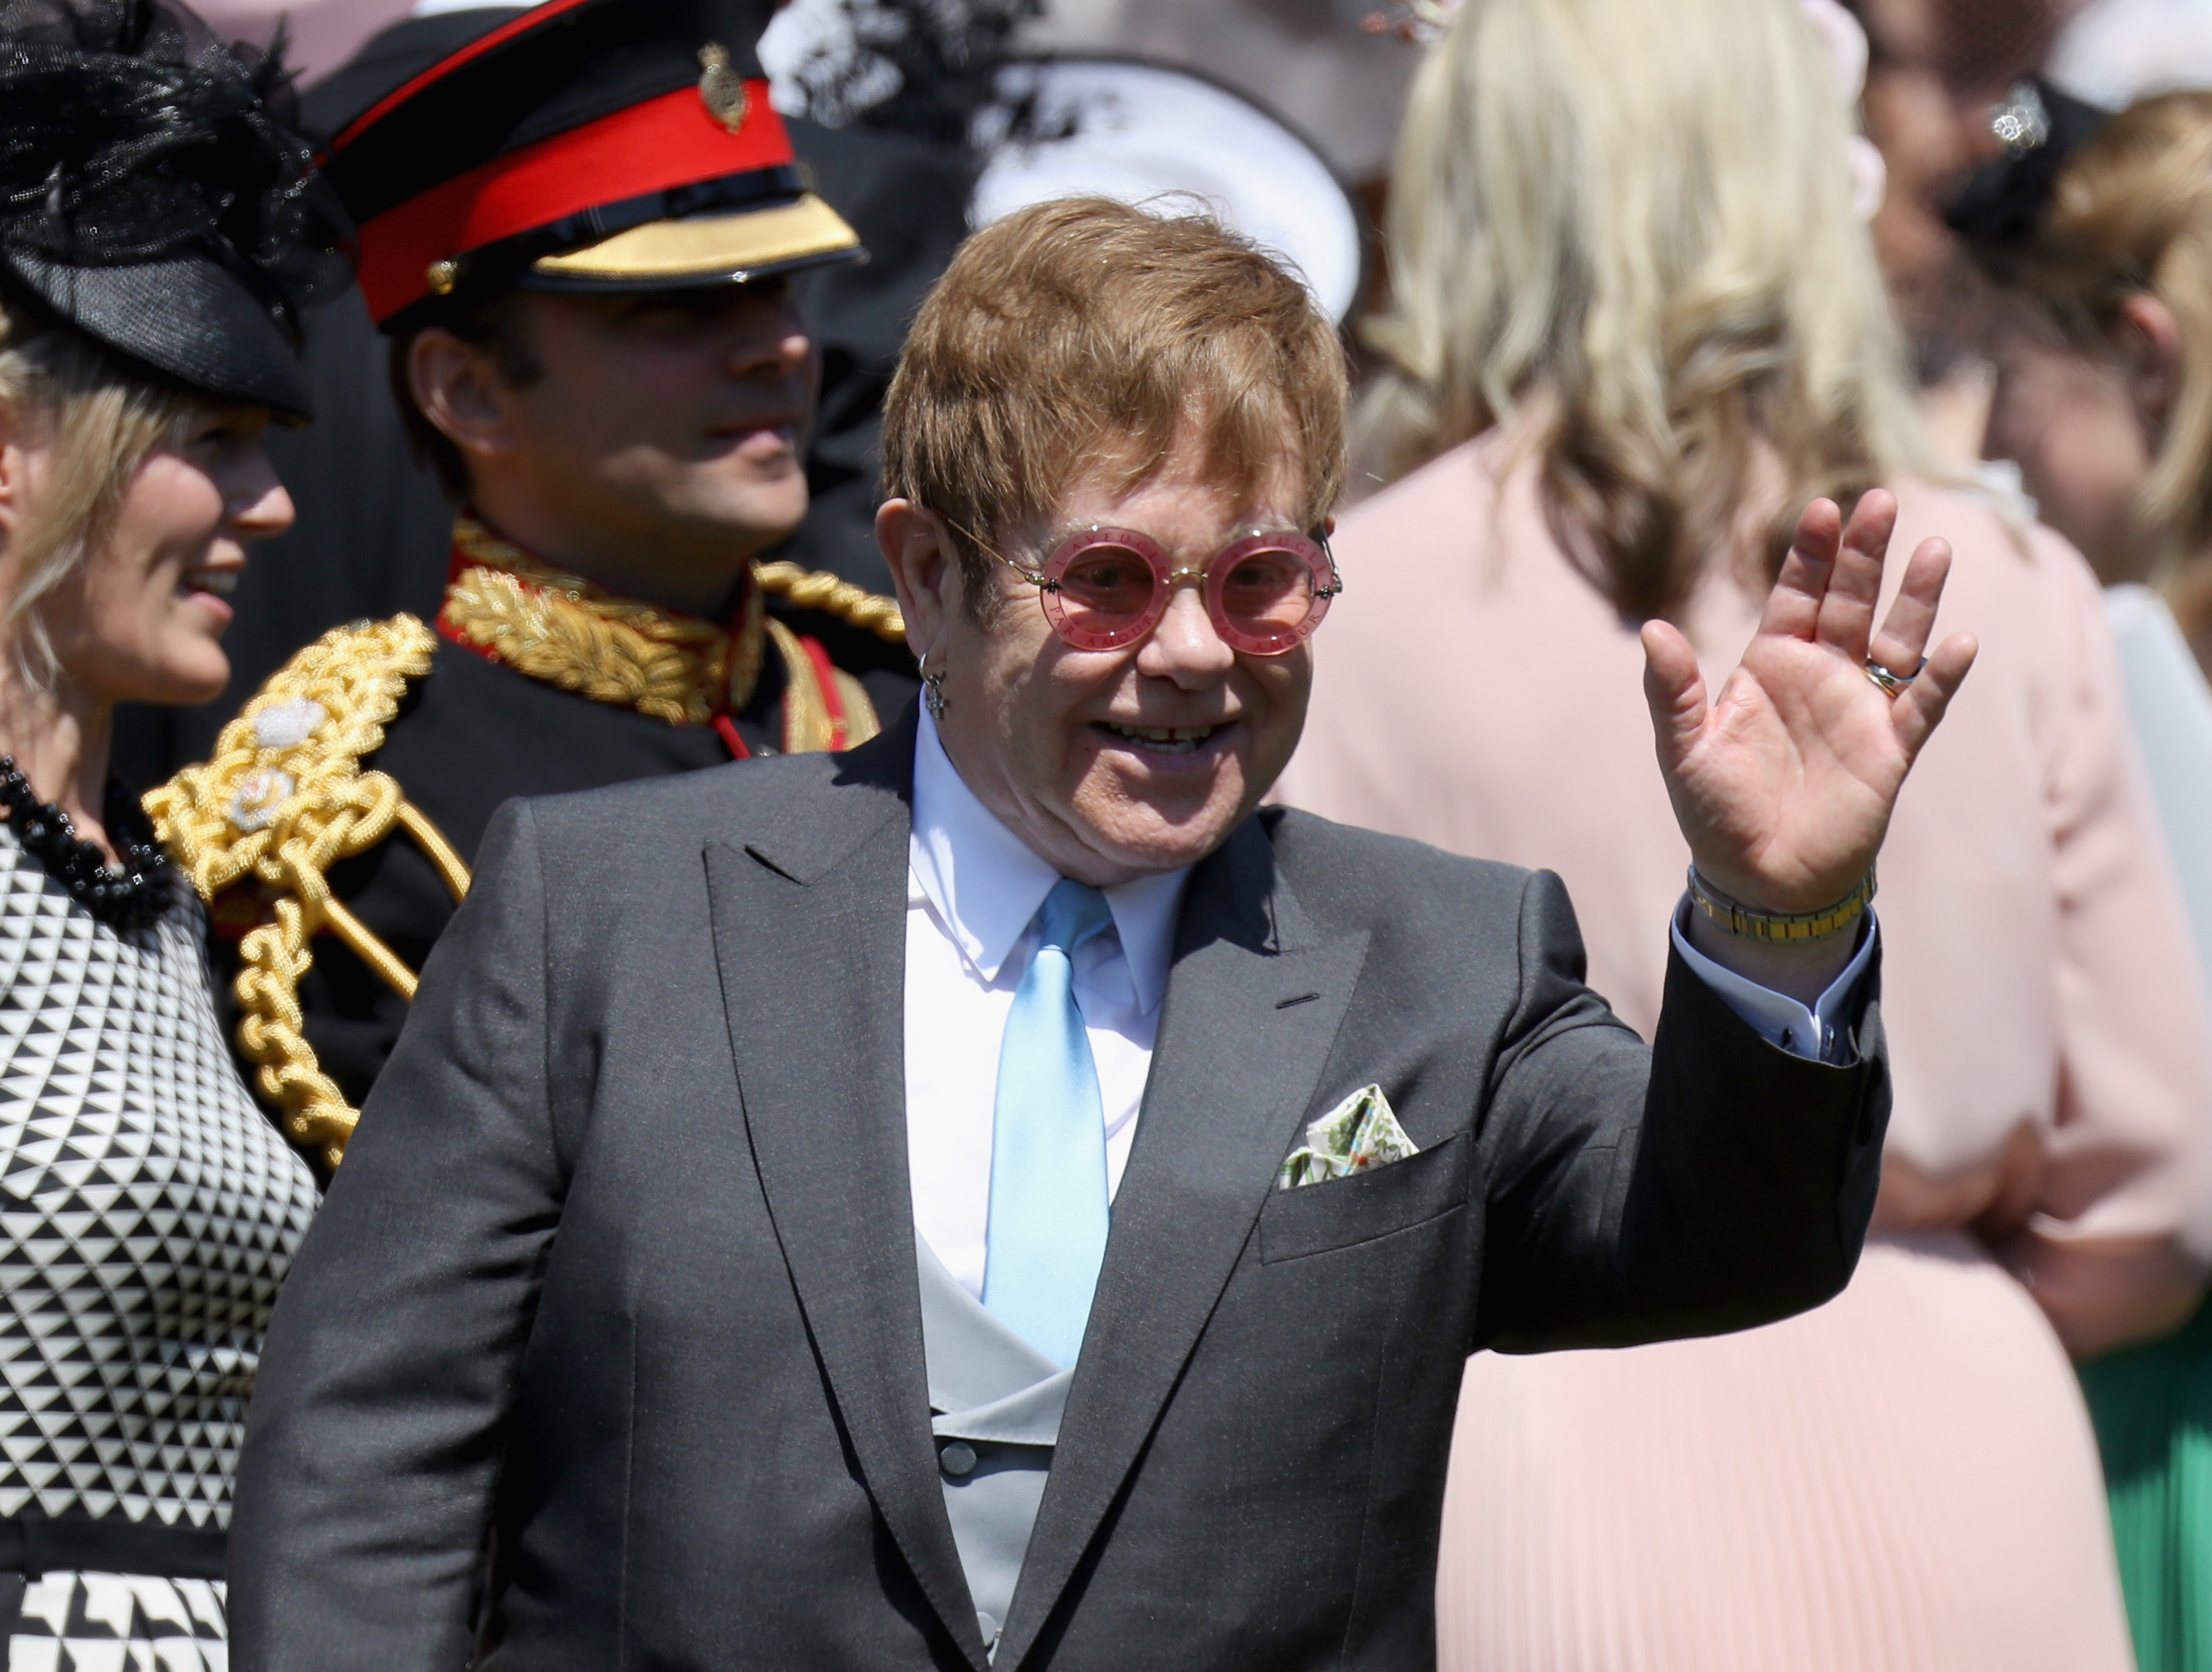 Sir Elton John arrives at the wedding of Prince Harry to Ms Meghan Markle at St George's Chapel, Windsor Castle on May 19, 2018 in Windsor, England. (Chris Jackson—Getty Images)